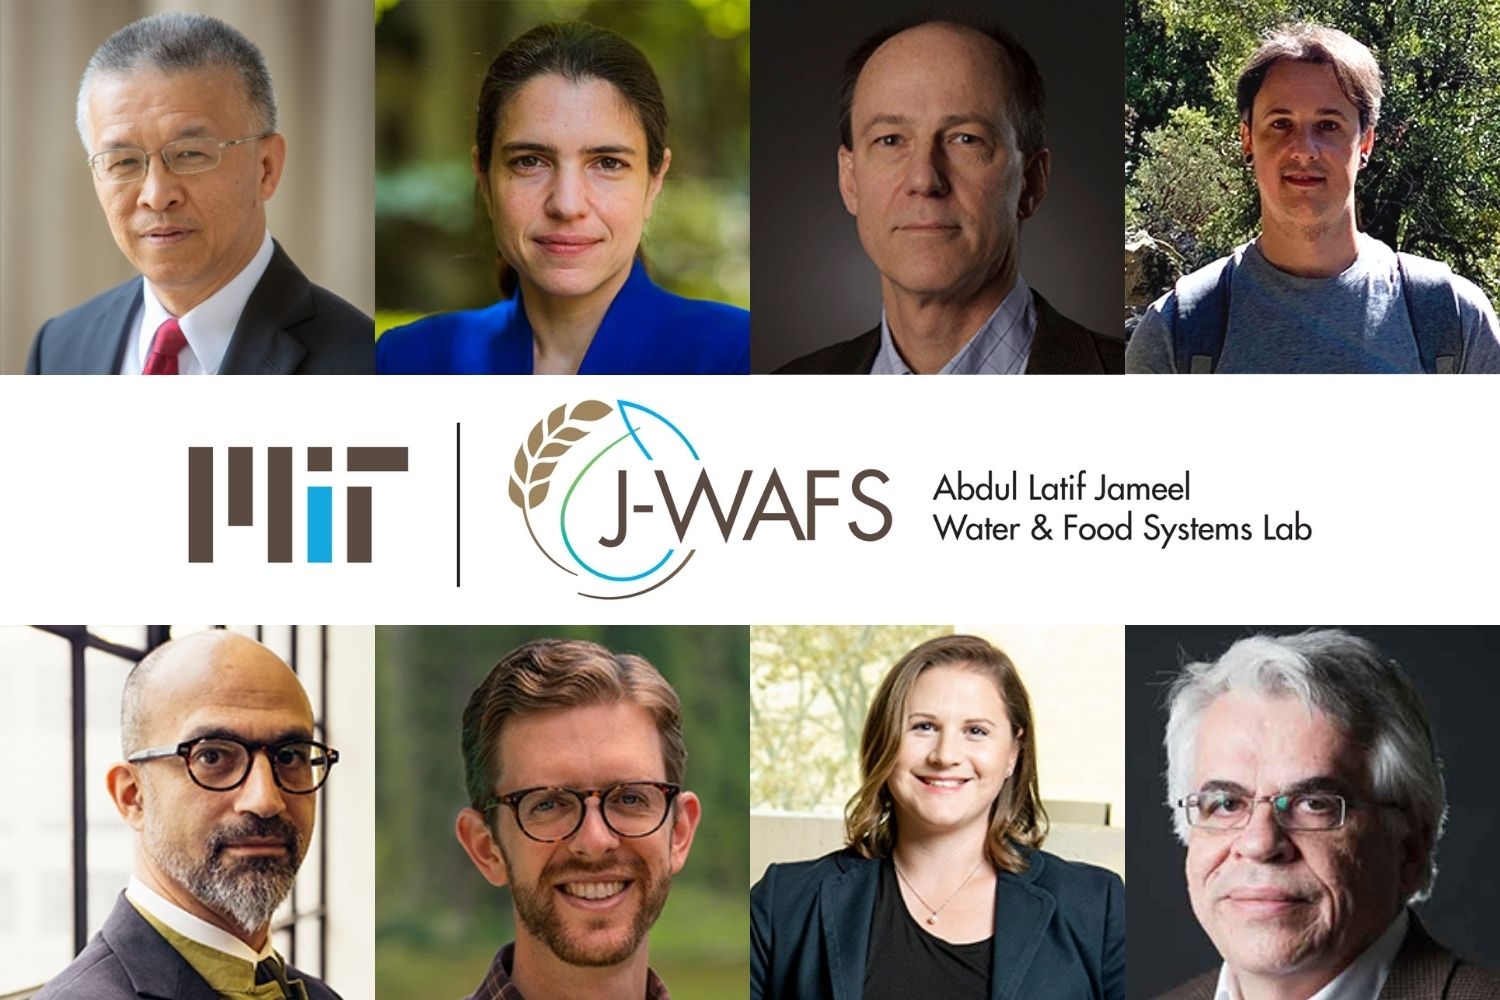 The 2022 J-WAFS seed grant recipients are (clockwise from top left) Gang Chen, Heather Kulik, Gregory Rutledge, César Terrer, John Fernández, Scott Odell, Ariel Furst, and Michael Triantafyllou.